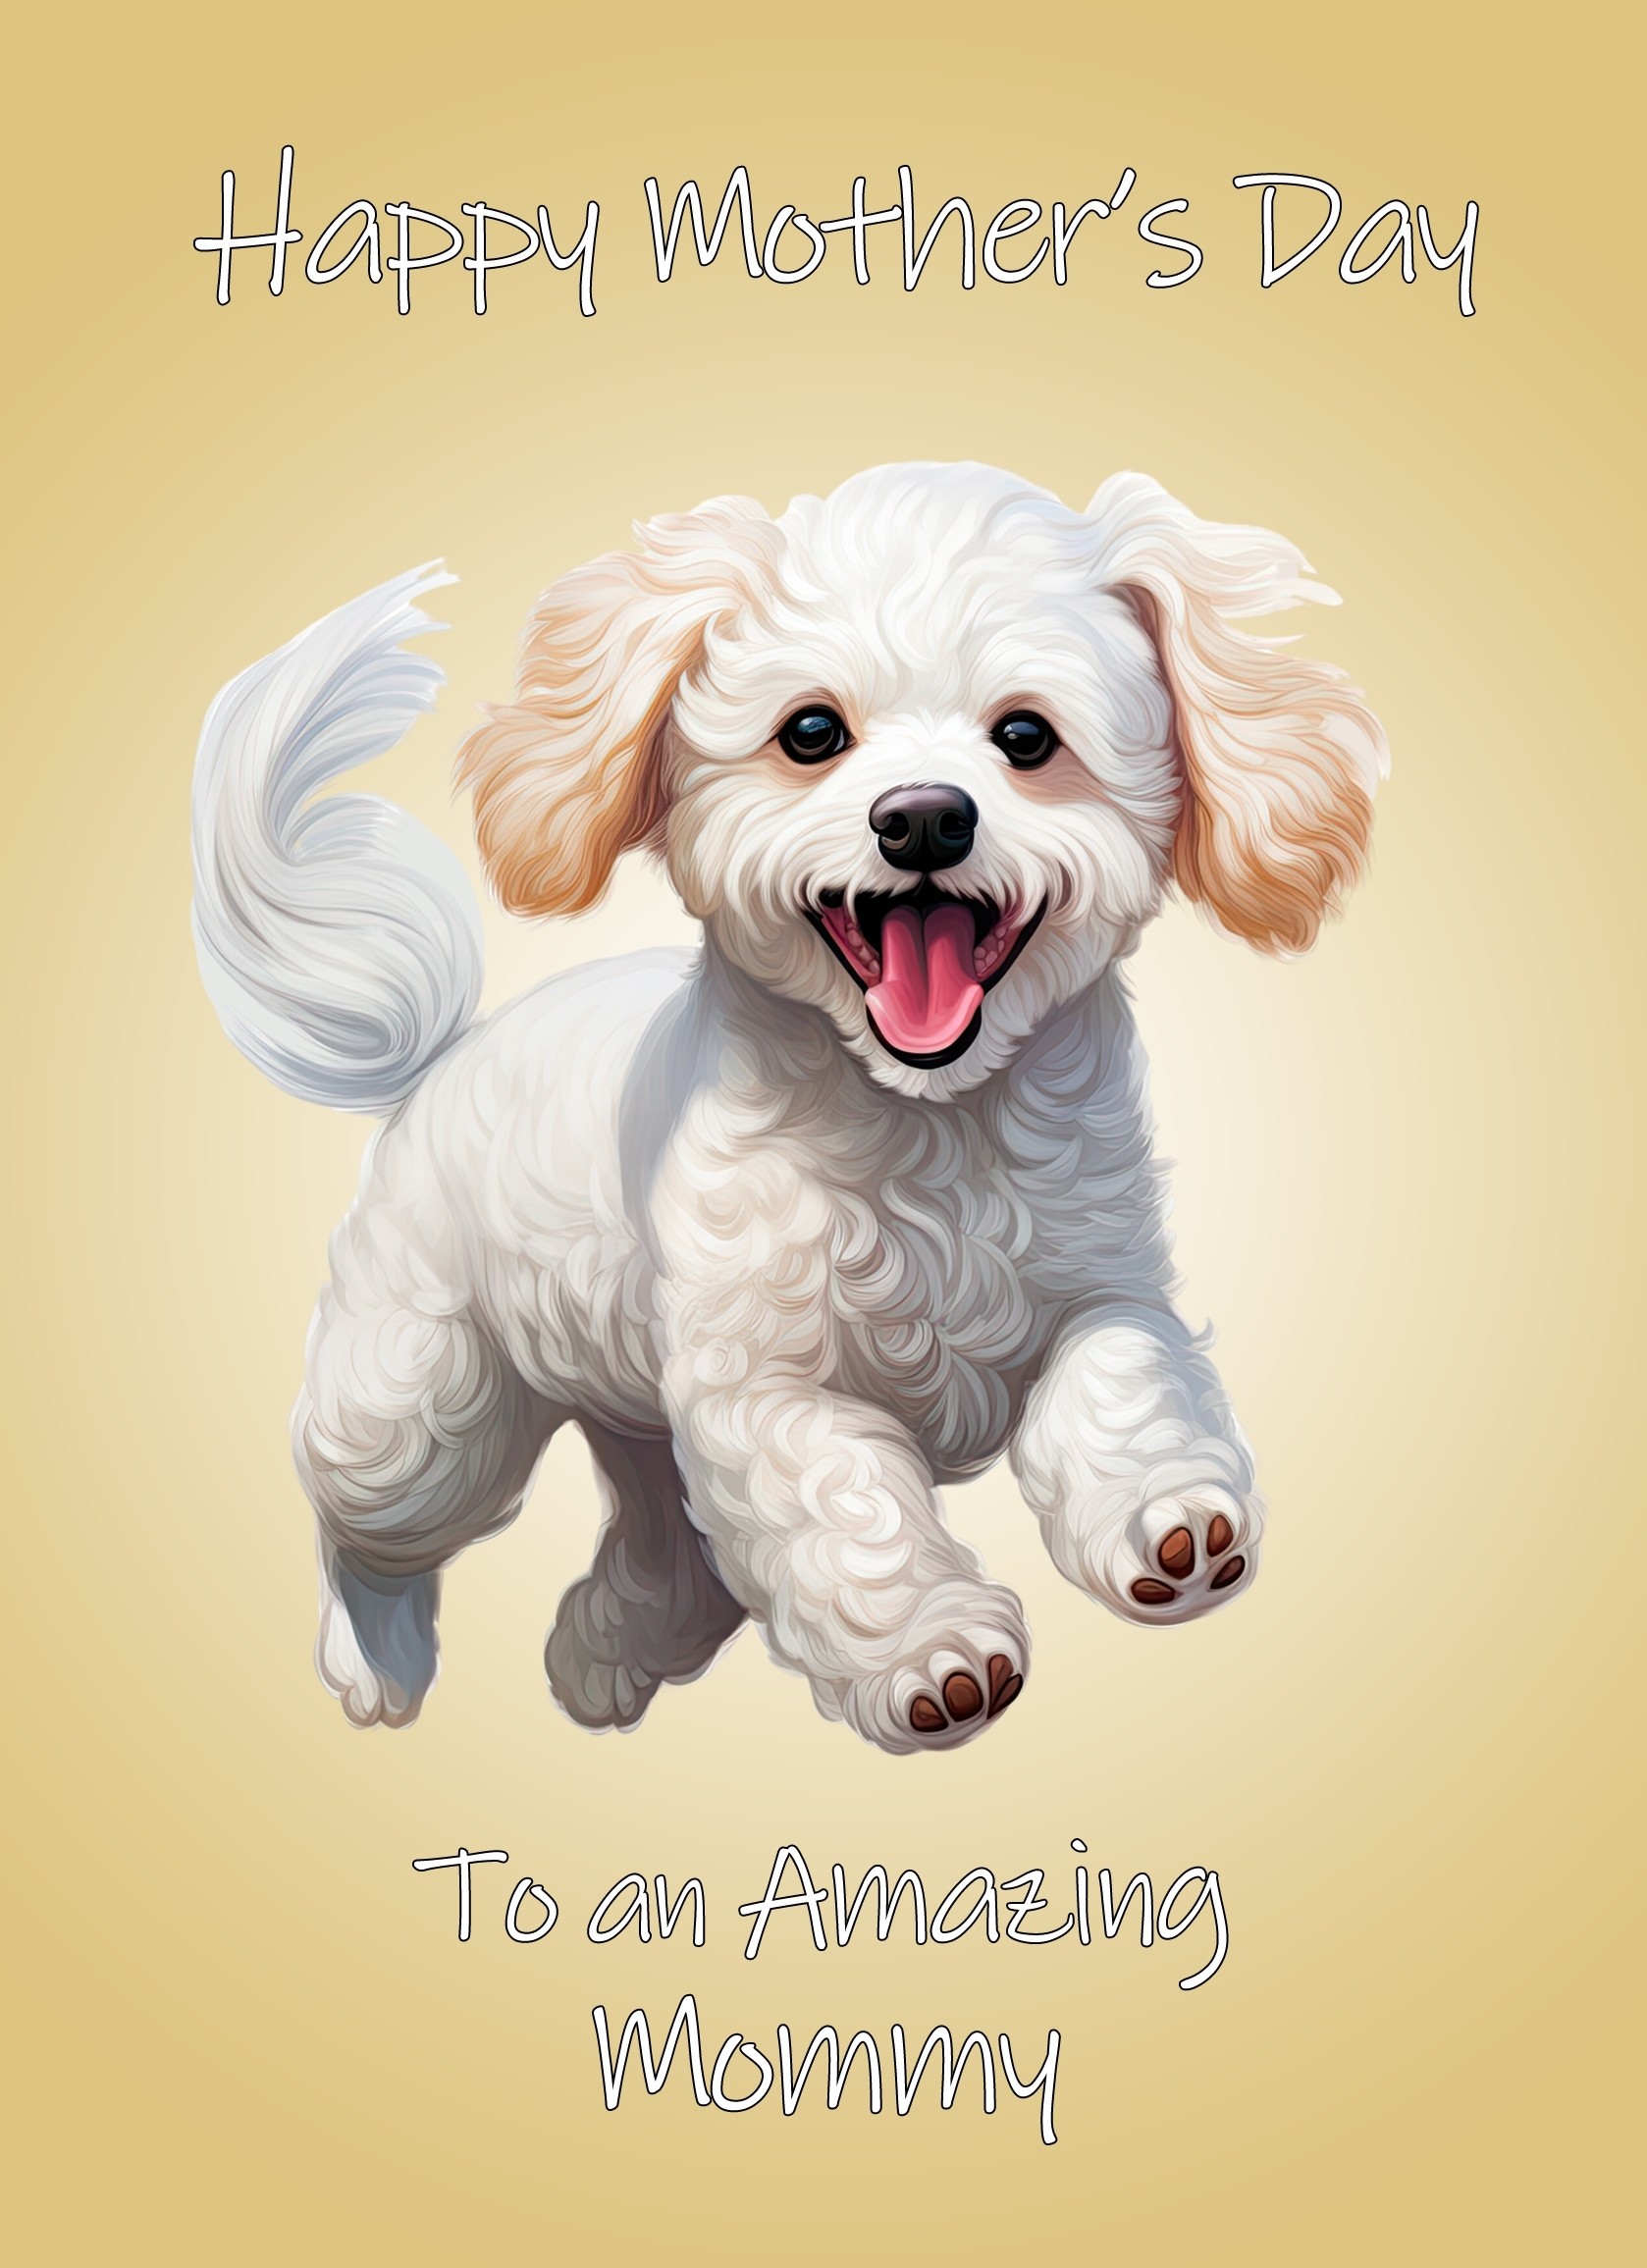 Poodle Dog Mothers Day Card For Mommy